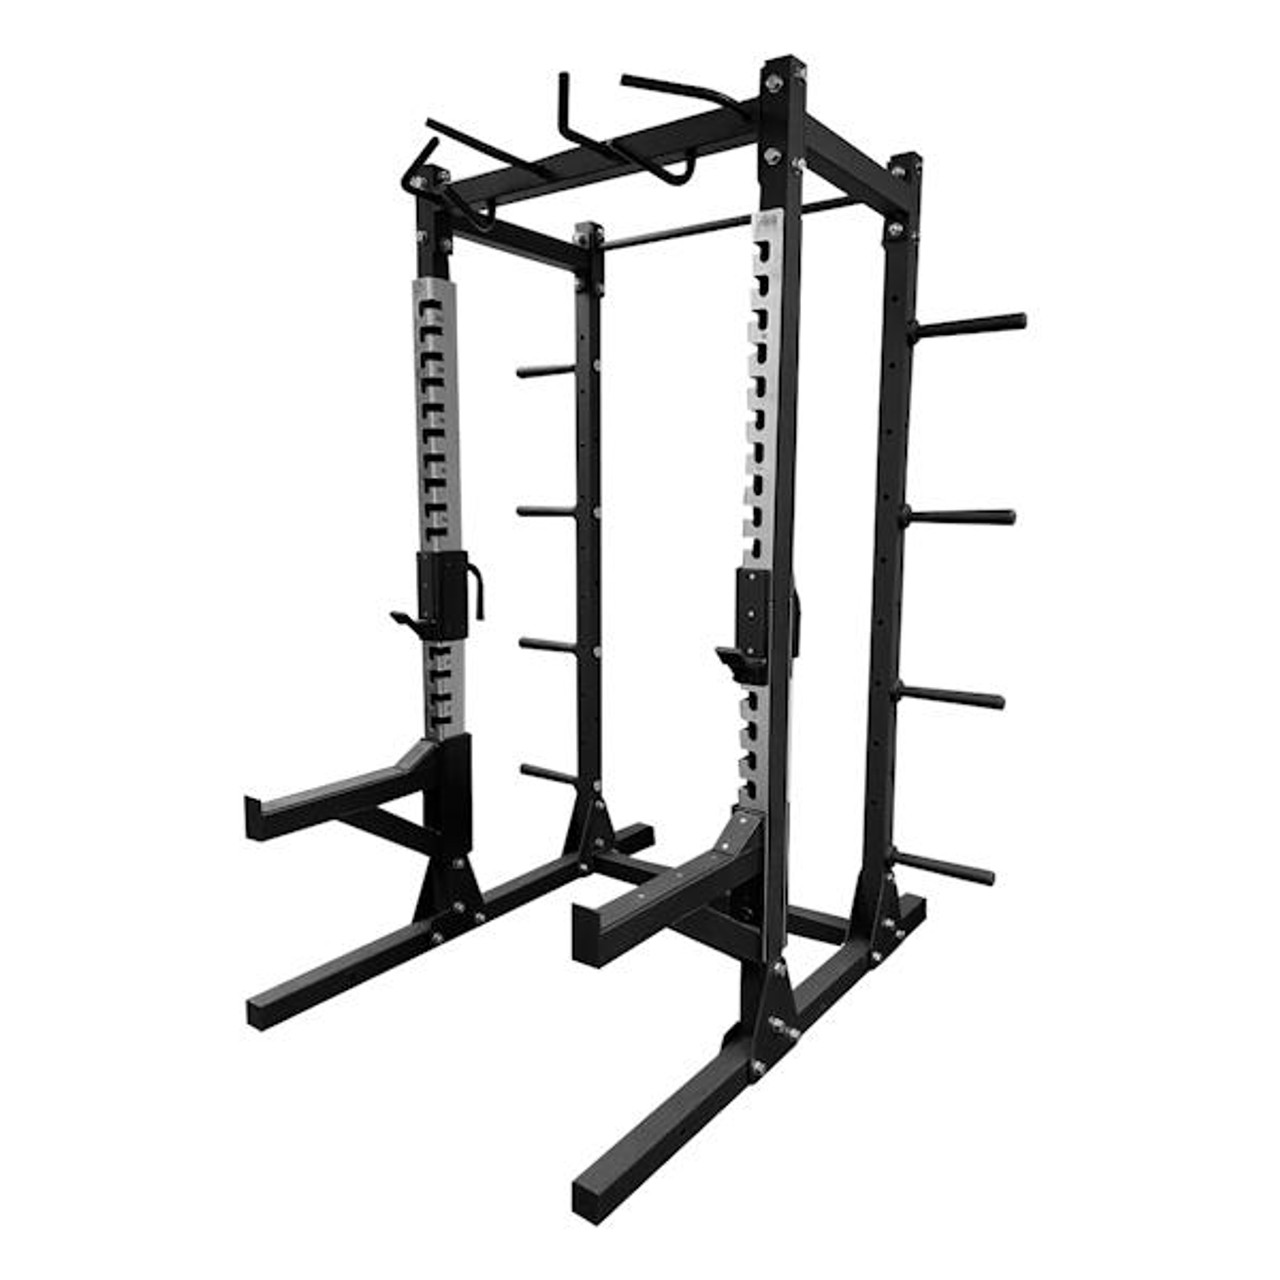 Half Rack with Spotter Arms - Fitness Experience